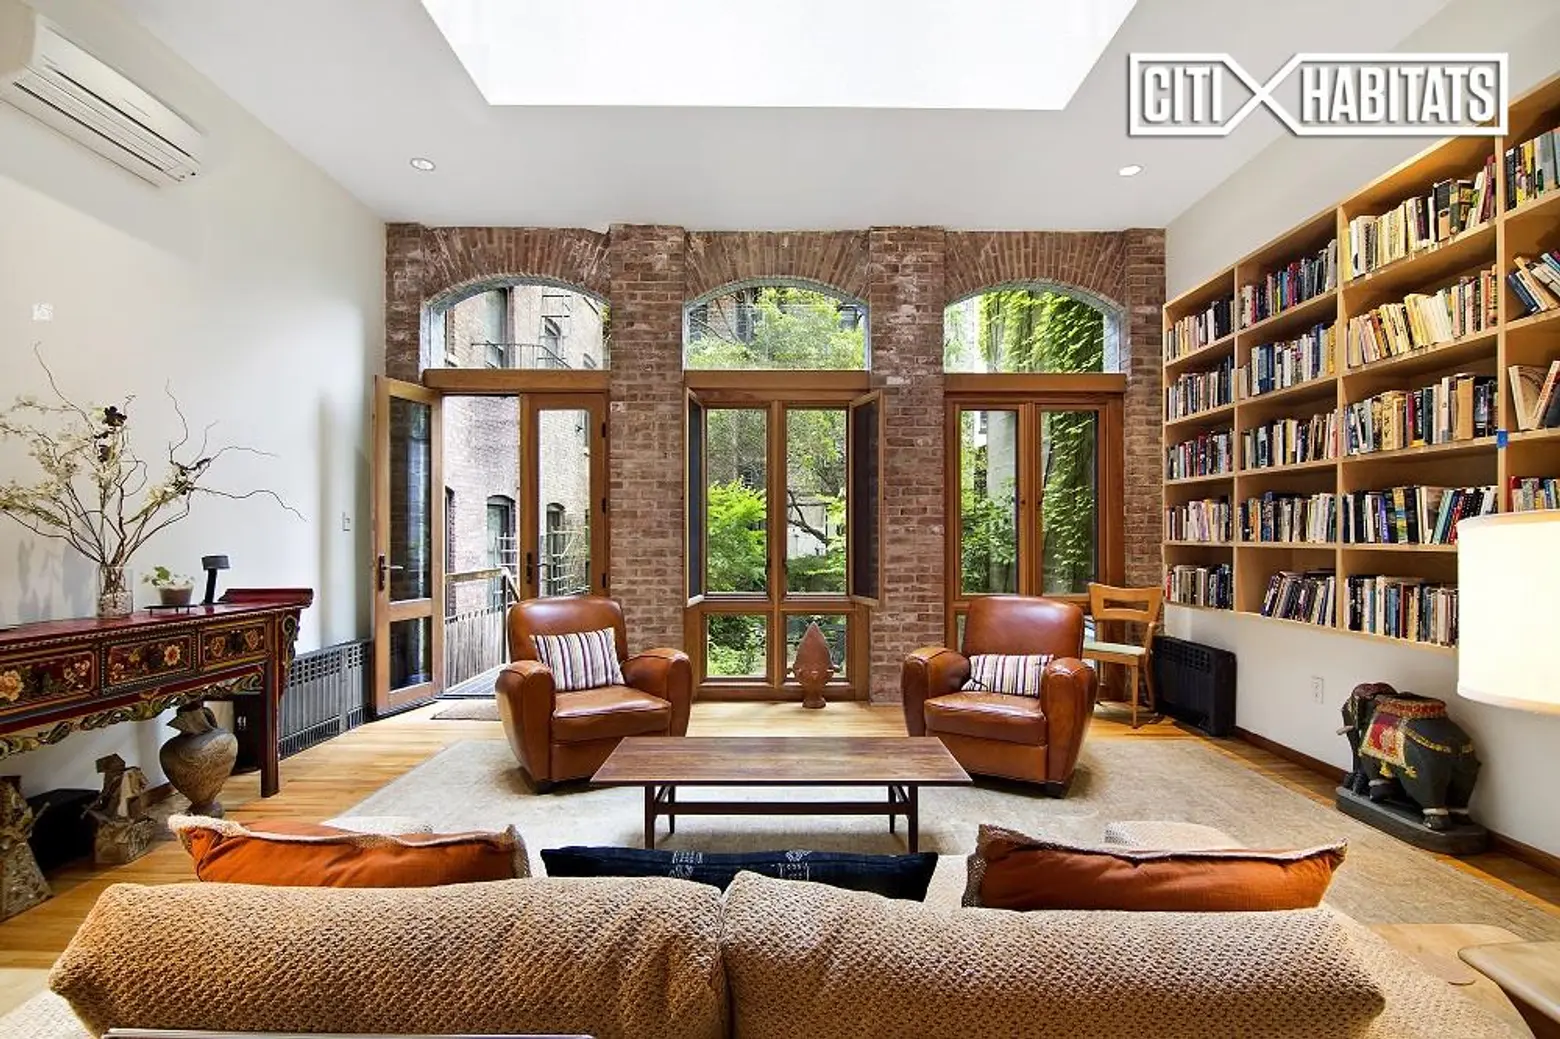 Chelsea Townhouse Has Lots of Wood, Brick and Sunshine and a Leafy Garden for $18K/Month